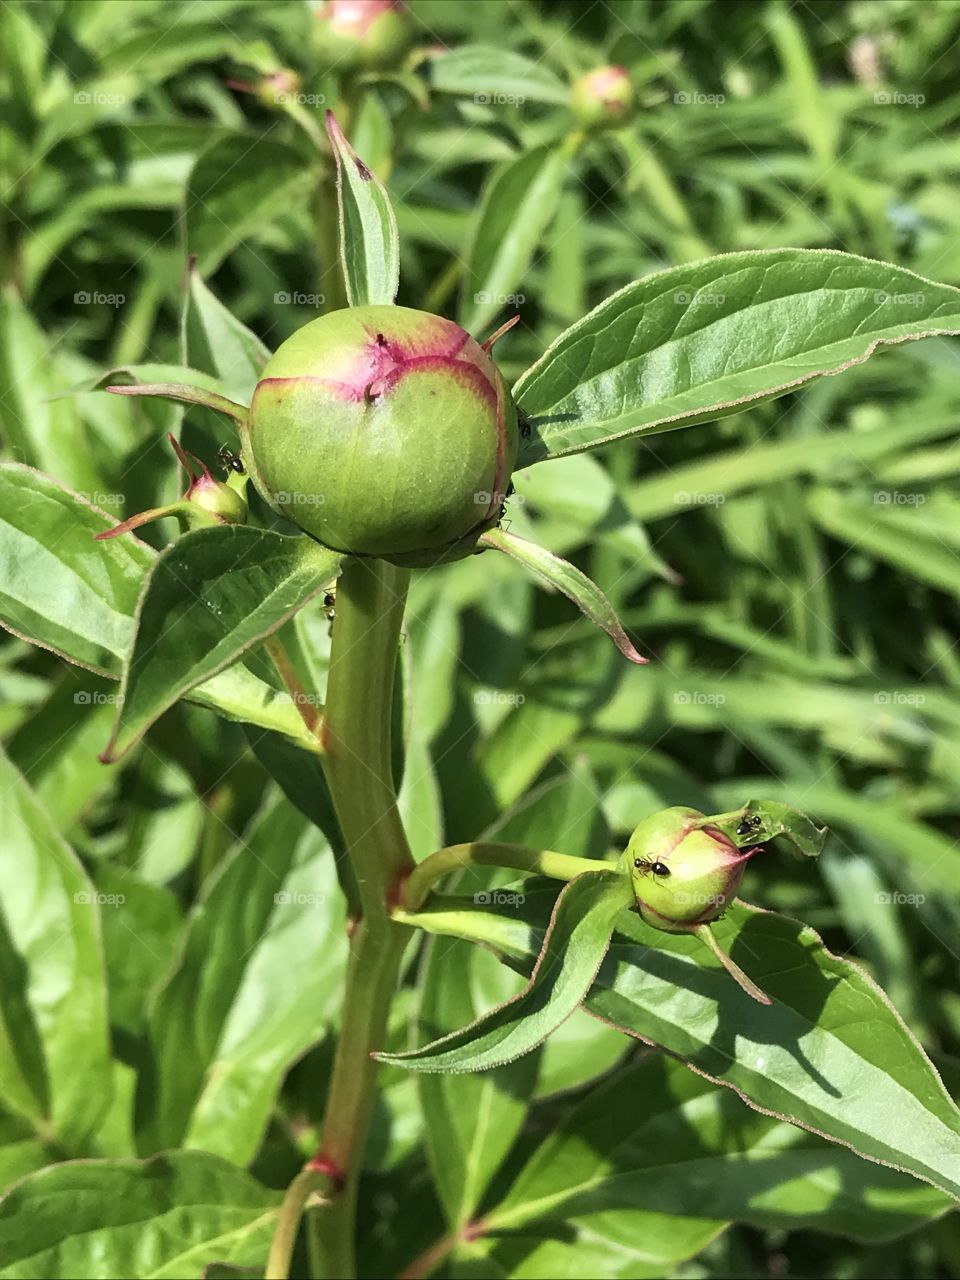 Ants working and crawling on the green and pink peony flower buds